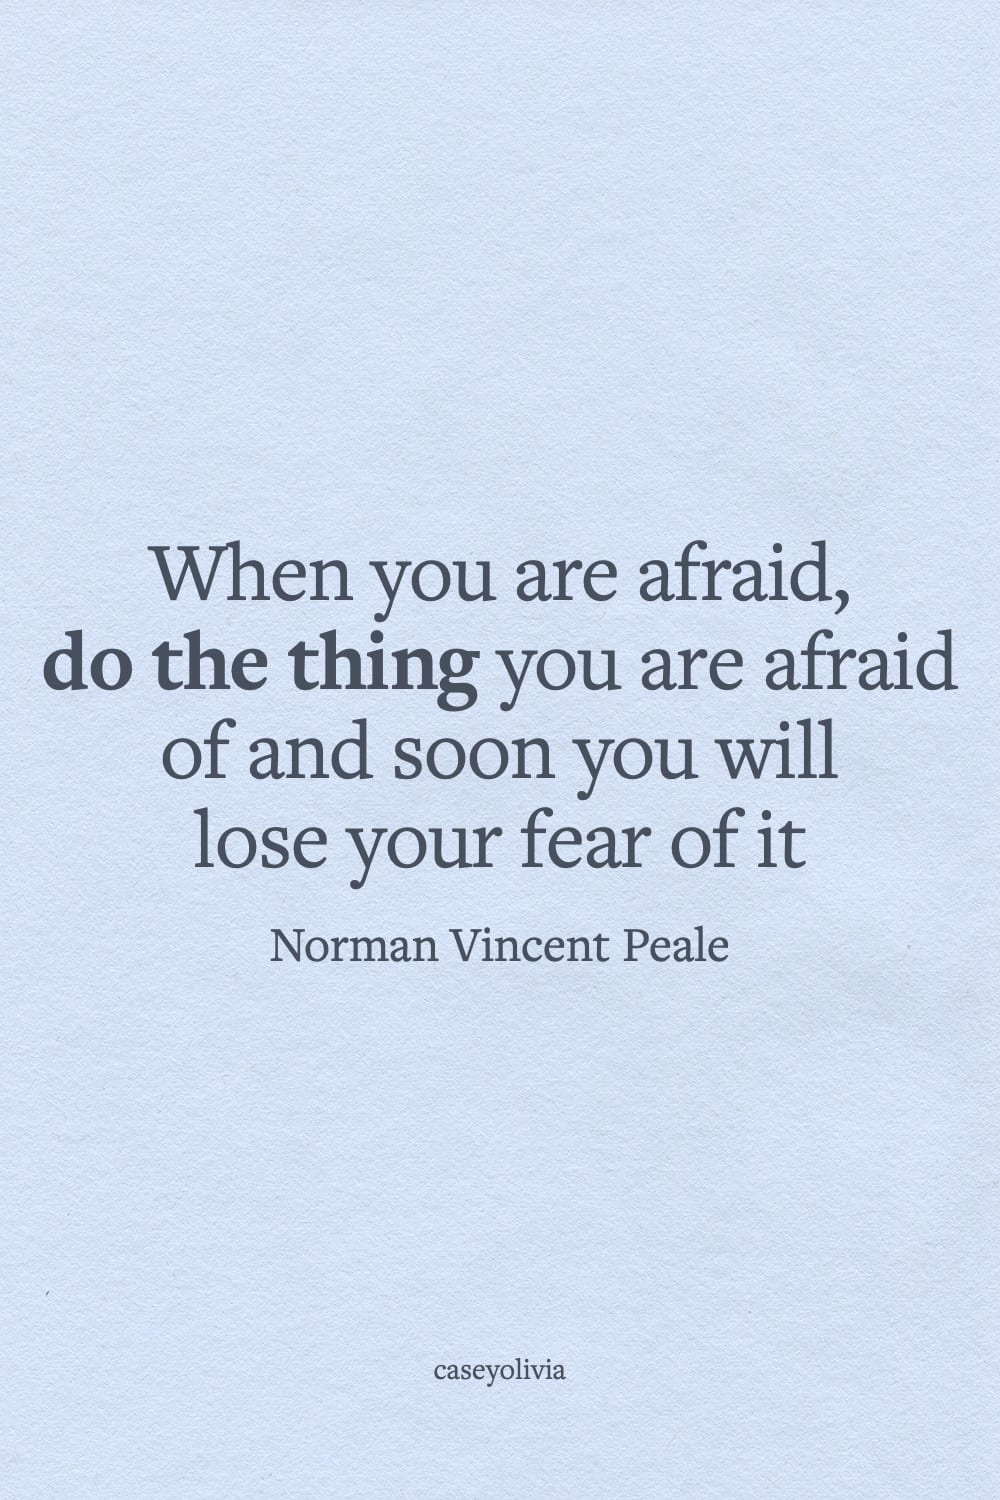 do the thing you are afraid to do norman vincent peale